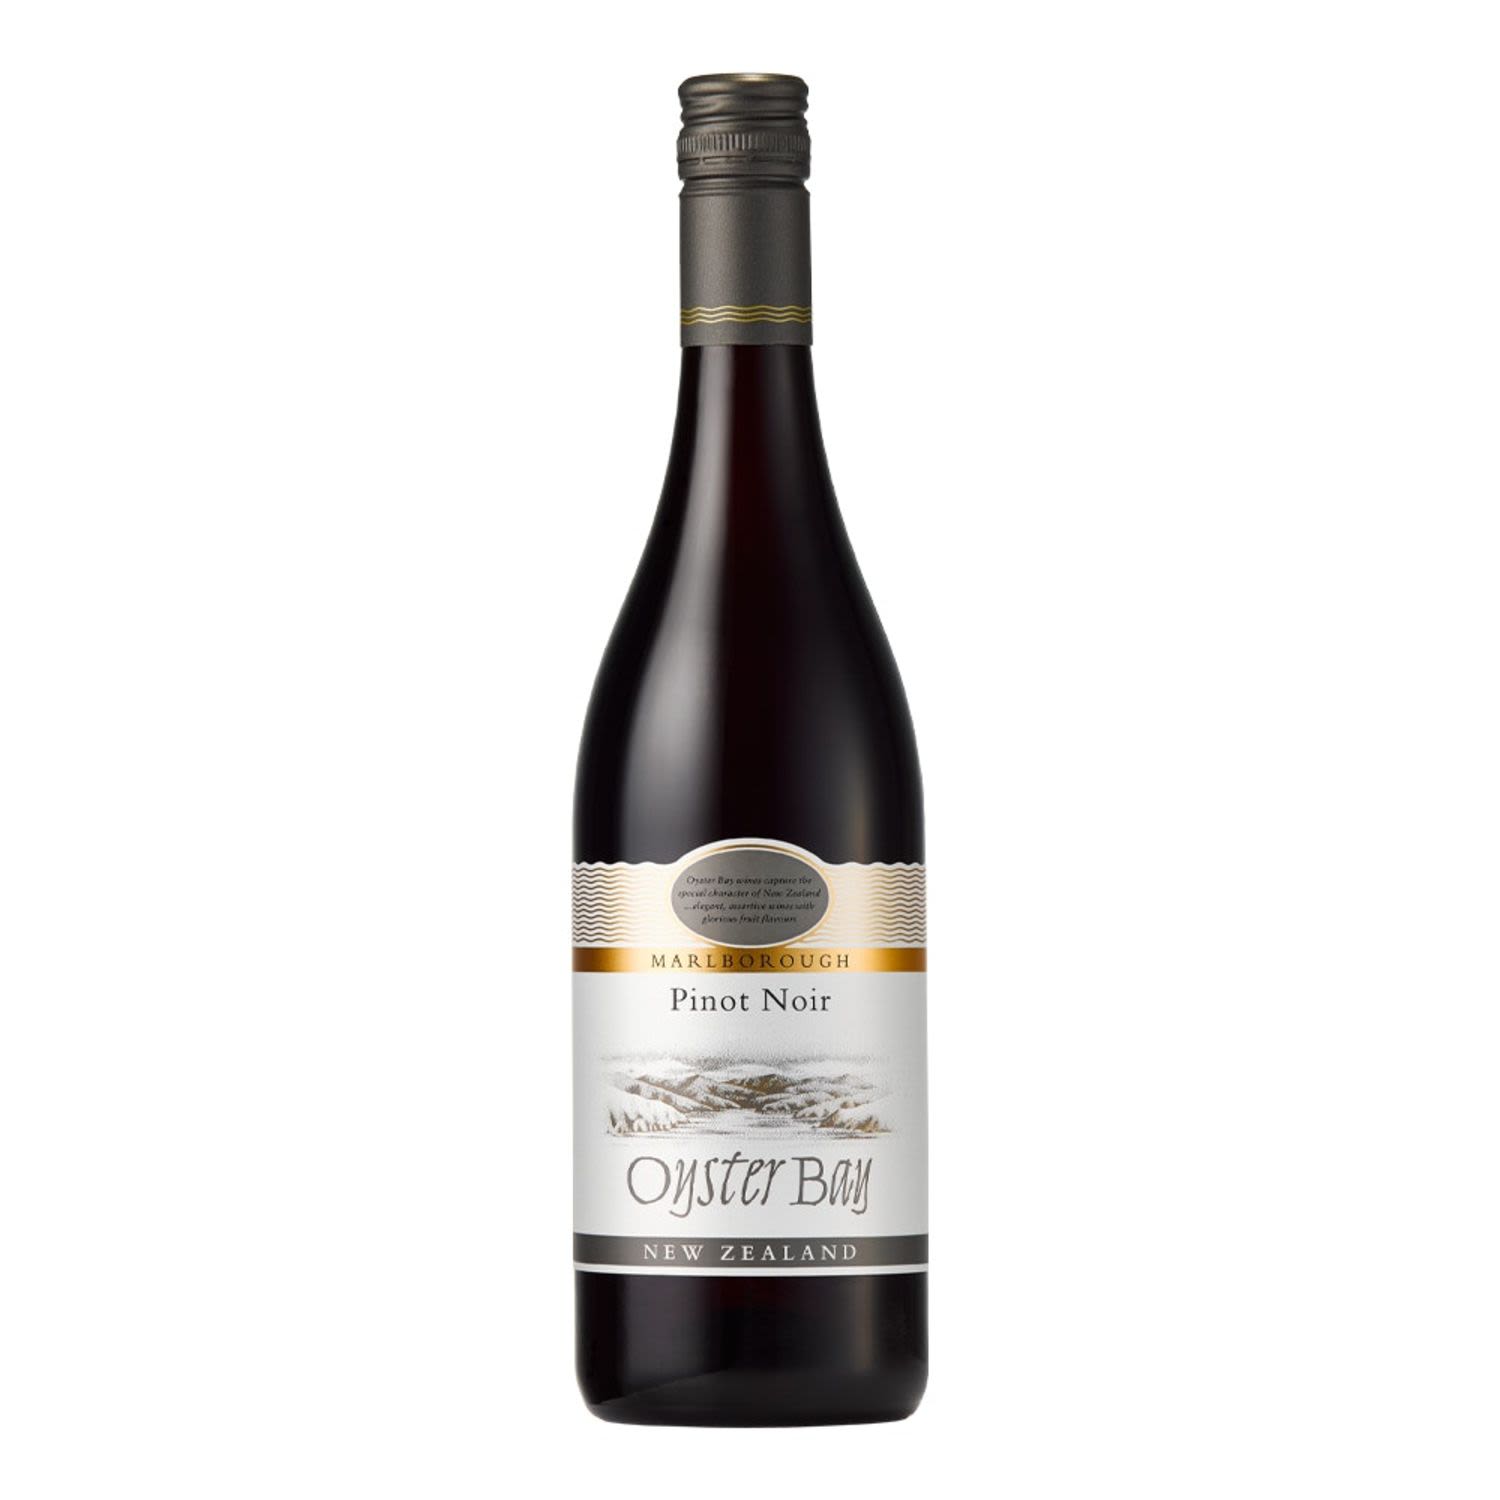 Oyster Bay Marlborough Pinot Noir is elegant cool climate Pinot Noir at its best. Fragrant, soft and flavourful with aromas of ripe cherries and sweet fruit tannins that provide structure and length.<br /> <br />Alcohol Volume: 13.50%<br /><br />Pack Format: 6 Pack<br /><br />Standard Drinks: 8</br /><br />Pack Type: Bottle<br /><br />Country of Origin: New Zealand<br /><br />Region: Marlborough<br /><br />Vintage: '2018<br />